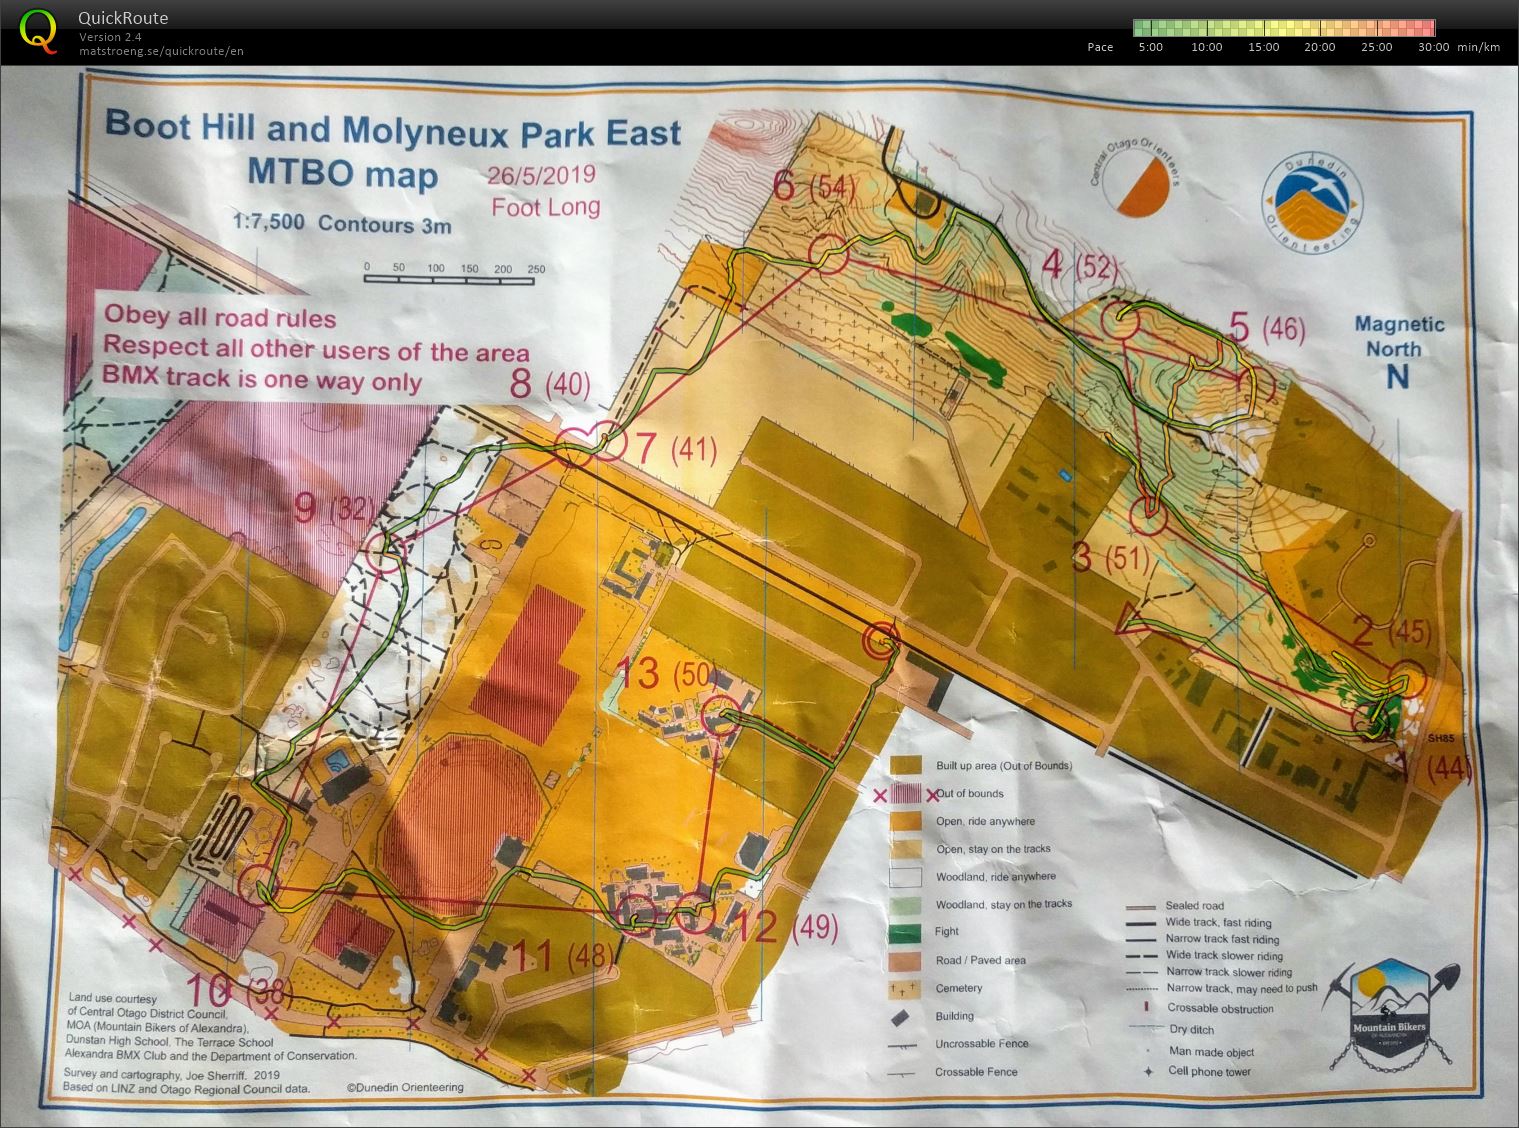 Boot Hill and Molyneux Park East MTBO - Foot Long (26-05-2019)